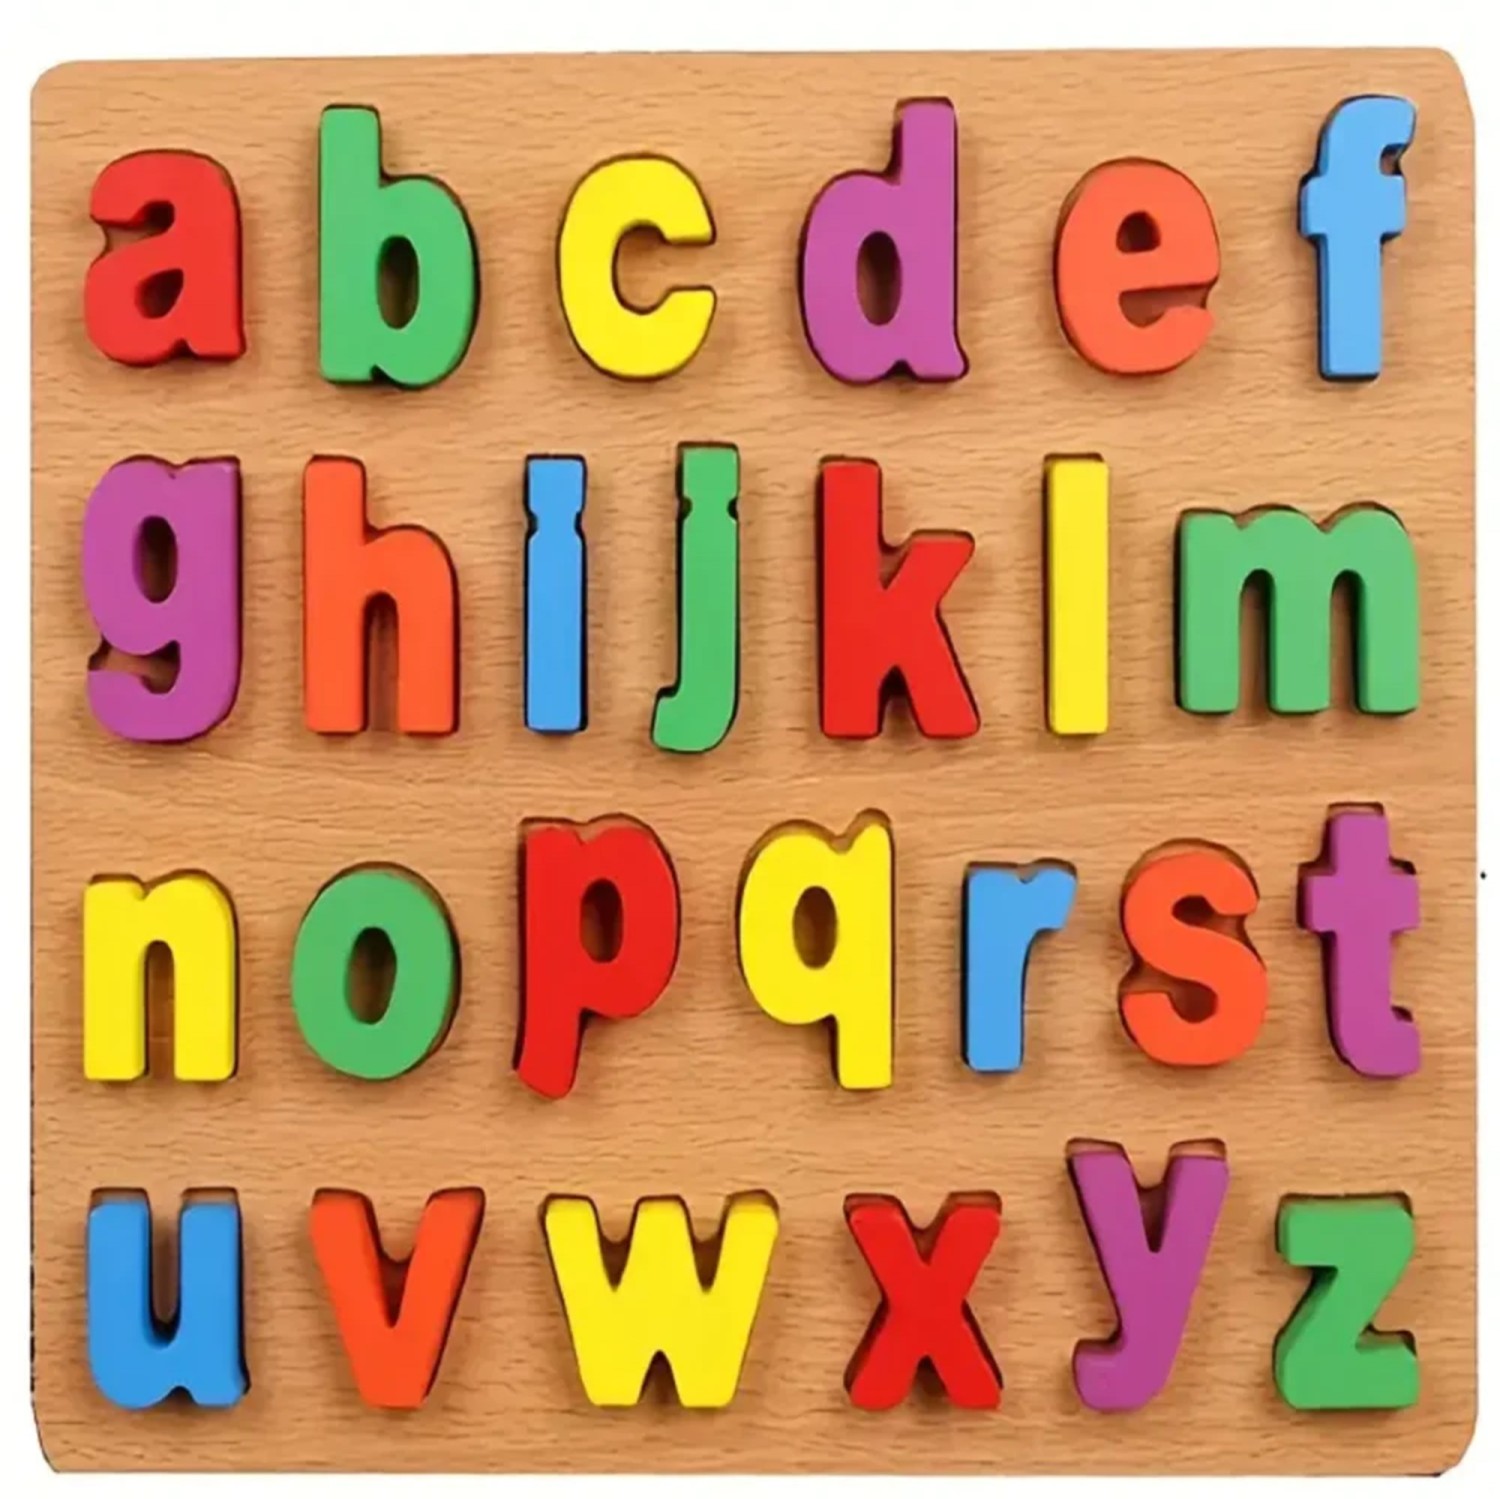 Lower Case Alphabet - Wooden Eduction Learning toy for Kids to Improve the Creativity Skills